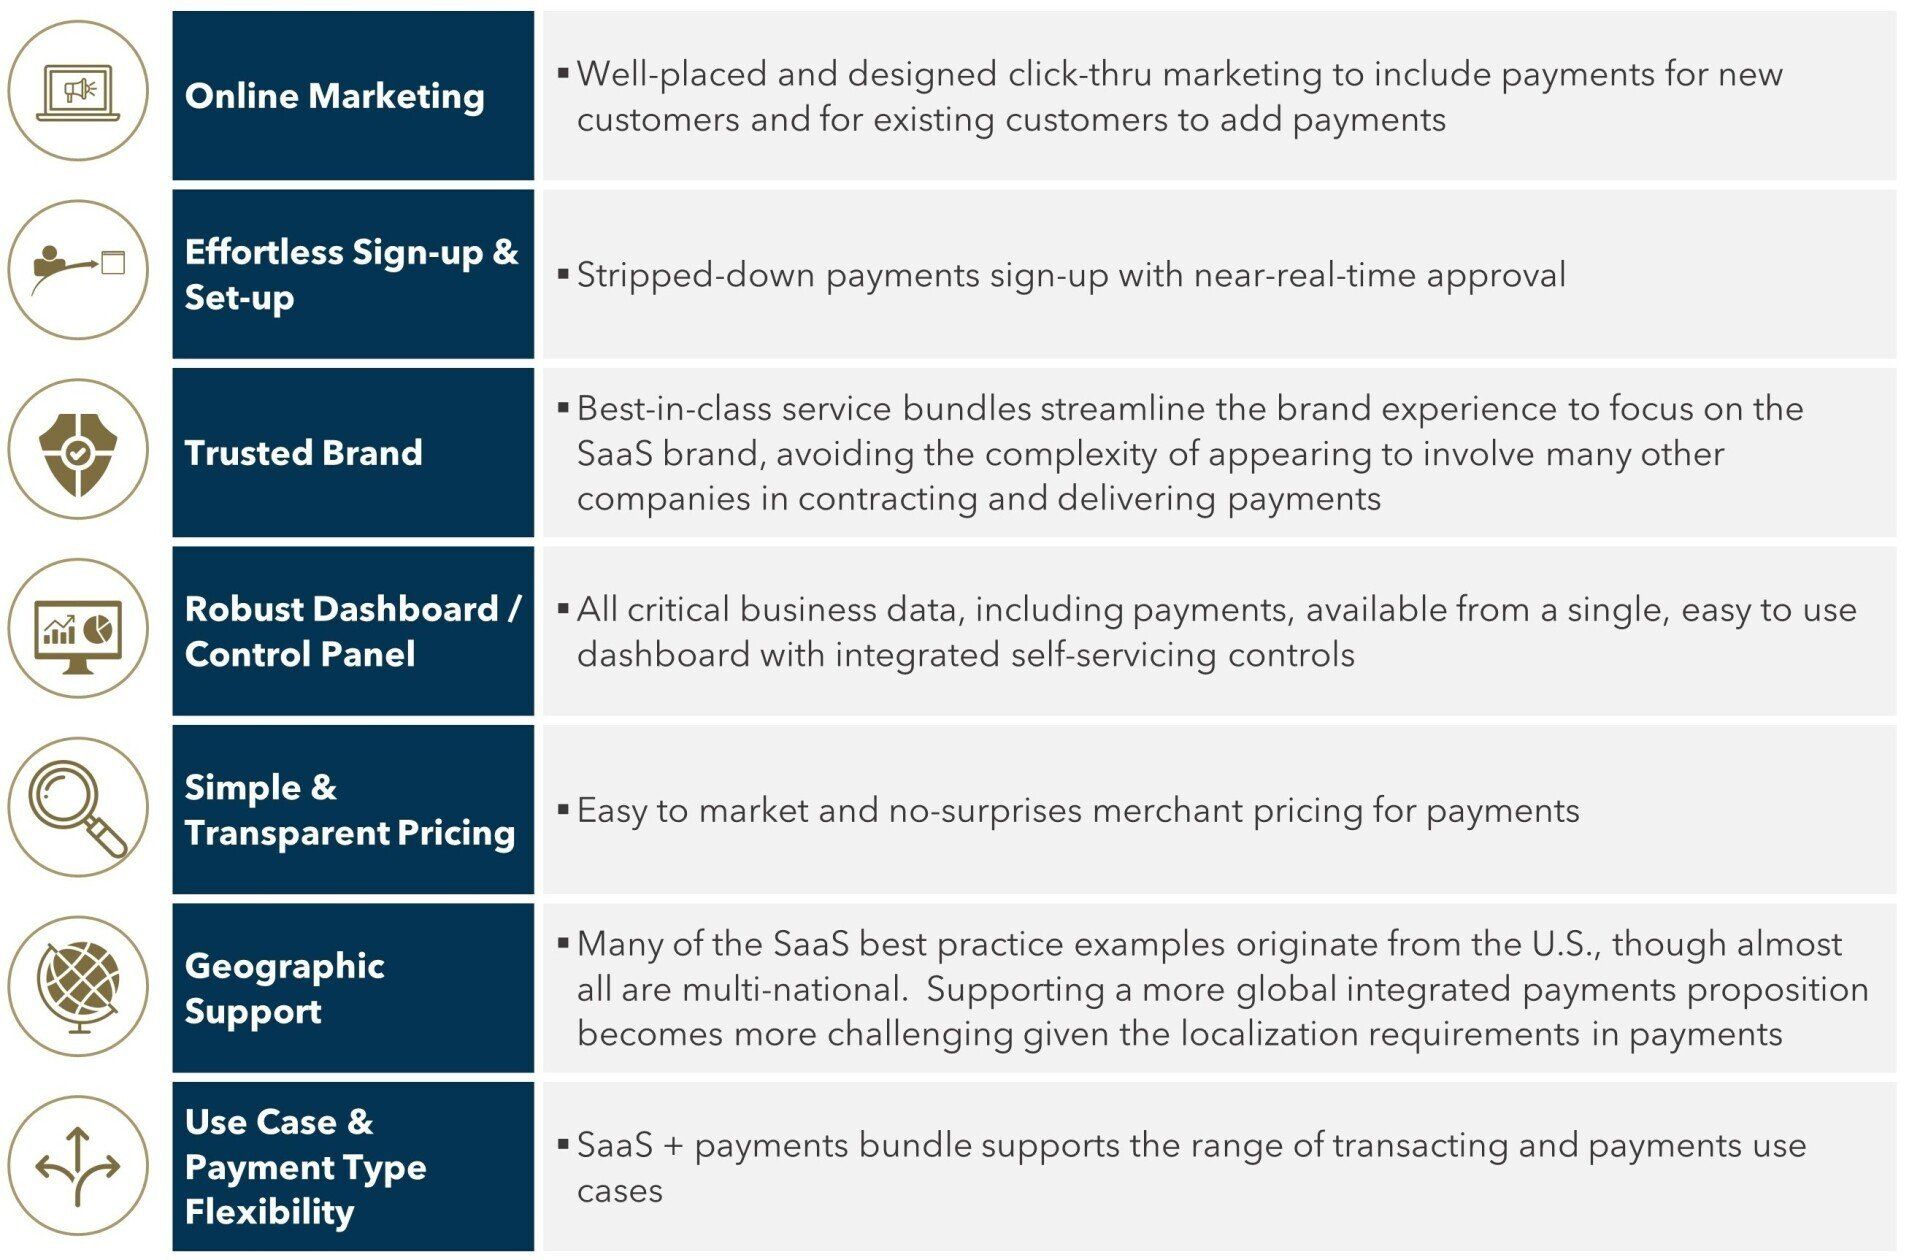  FIGURE 4: Best Practices for Growing SaaS-based Payments
  